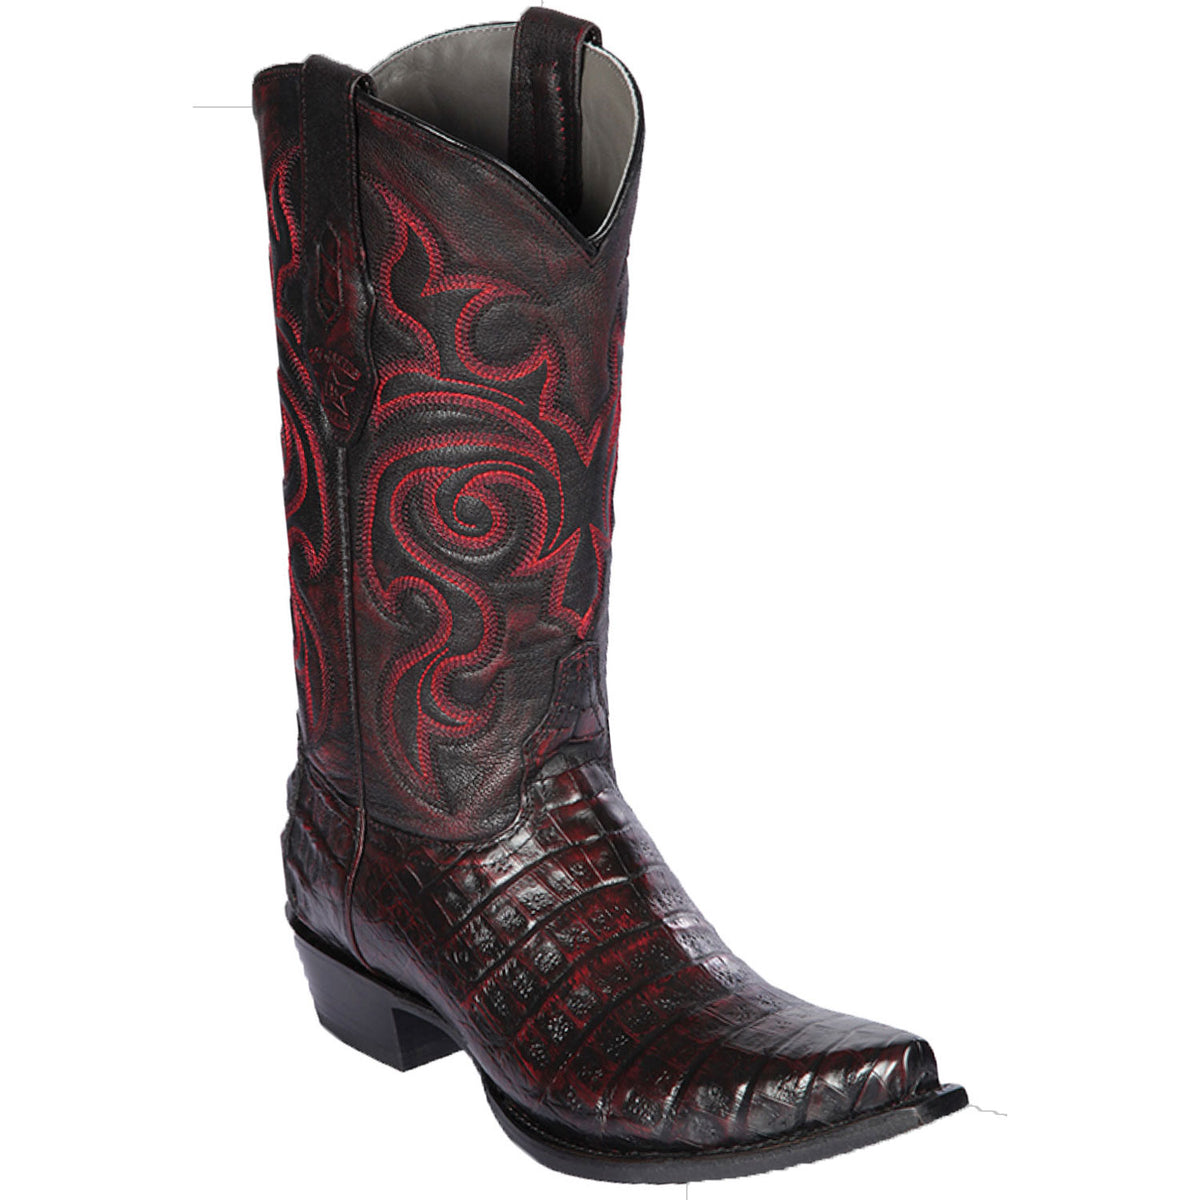 Caiman Belly Skin Boot LAB-9482